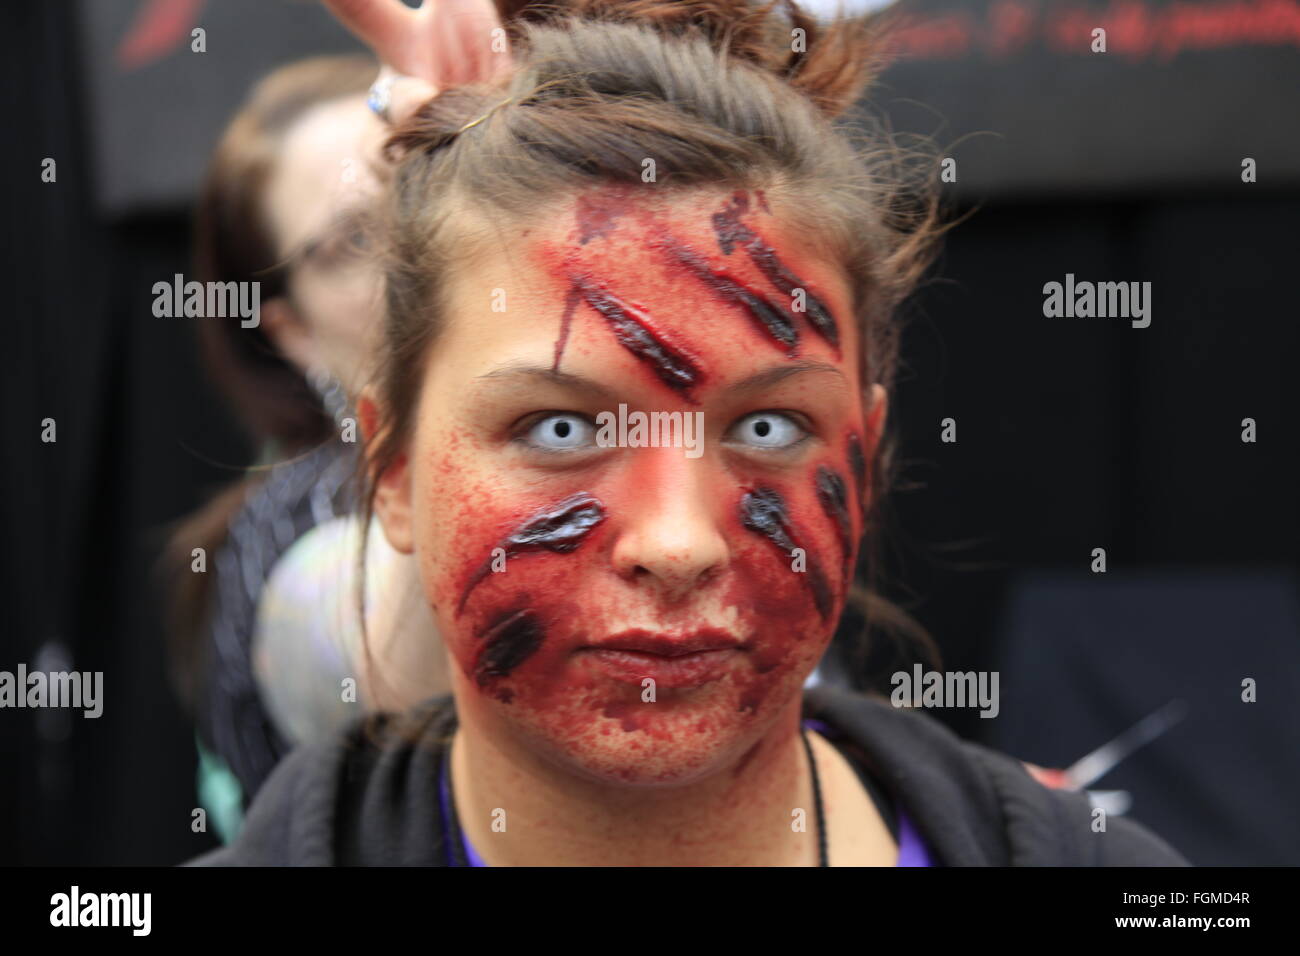 London, UK. 21st February, 2016. Walking Dead TV Convention Walker Stalker Con Olympia London 21/02/2016 walking dead fans gather to see stars of the show and stalls selling everything to do with the hit zombie American show photo ops with a star or zombie. cosplayers & undead walkers roaming the event floor entertaining the crowds. Stalls selling make-up and characters from the show. Credit:  Paul Thompson/Alamy Live News Stock Photo